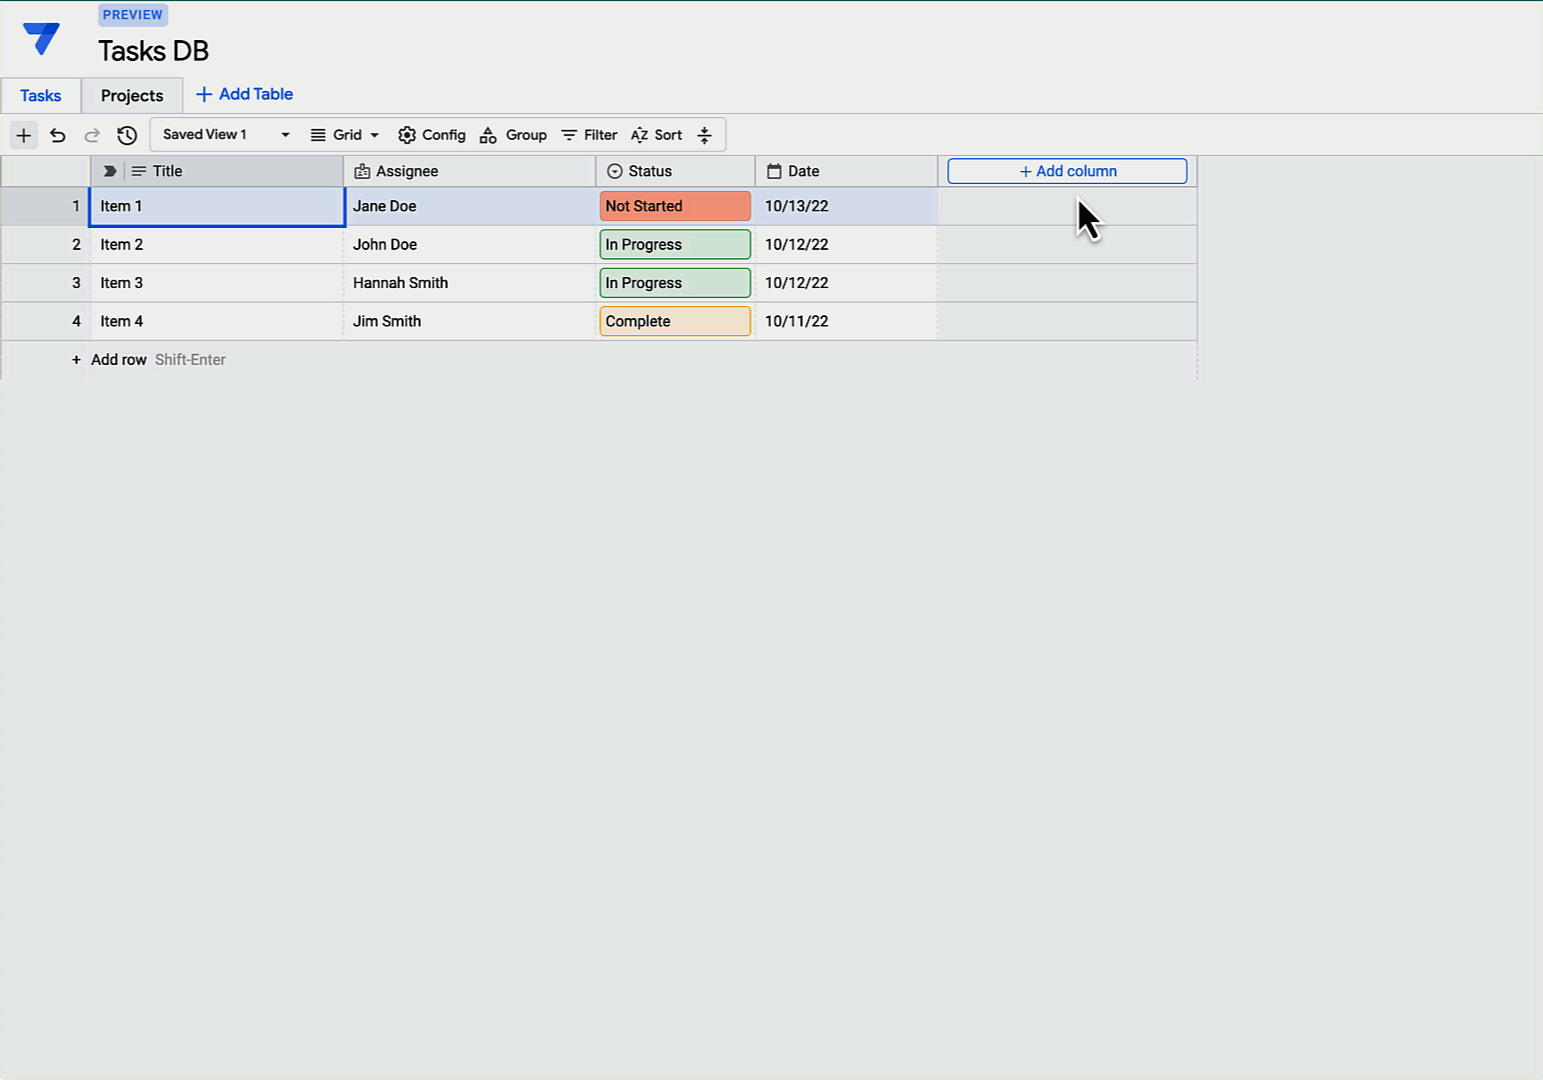 Screen capture of the database editor's toolset for relational data design and management in AppSheet.